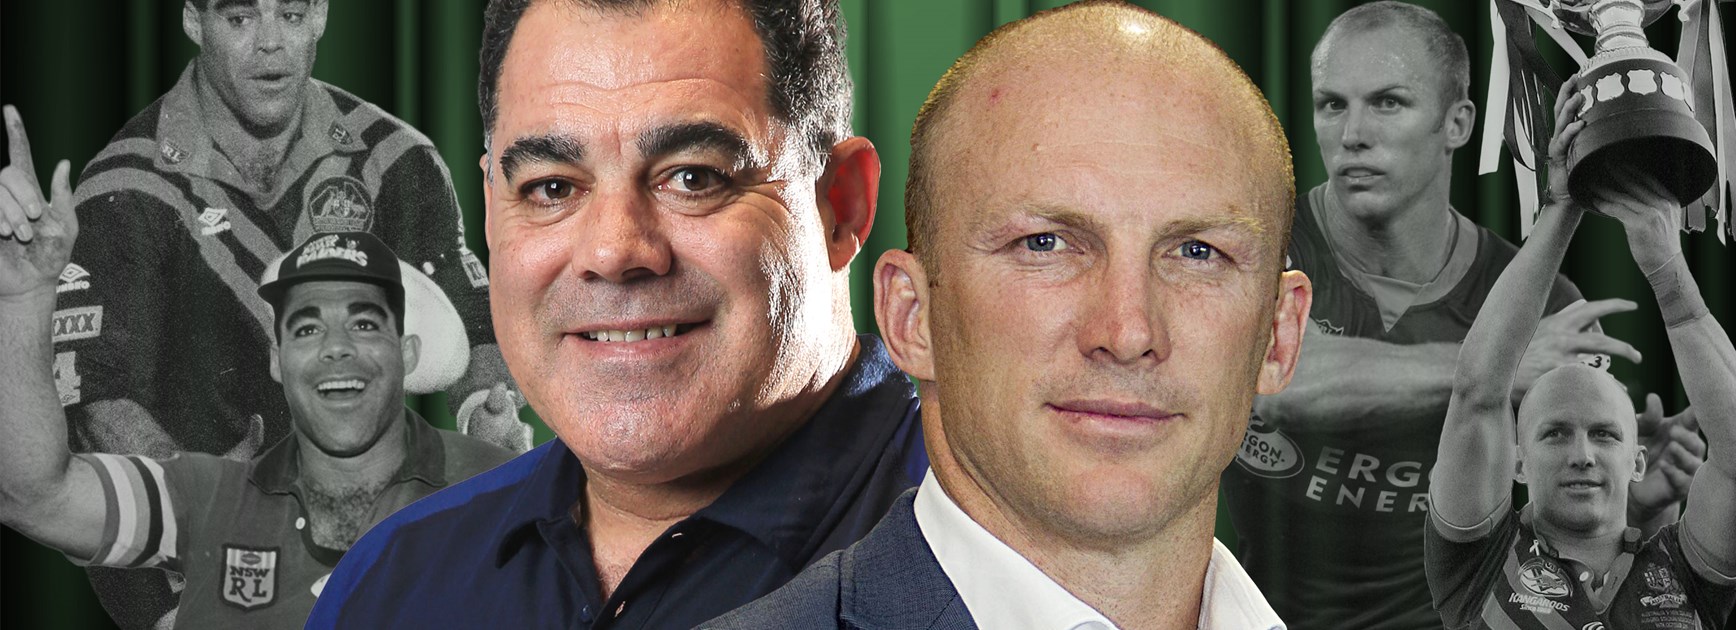 Why Meninga and Lockyer should be next Immortals